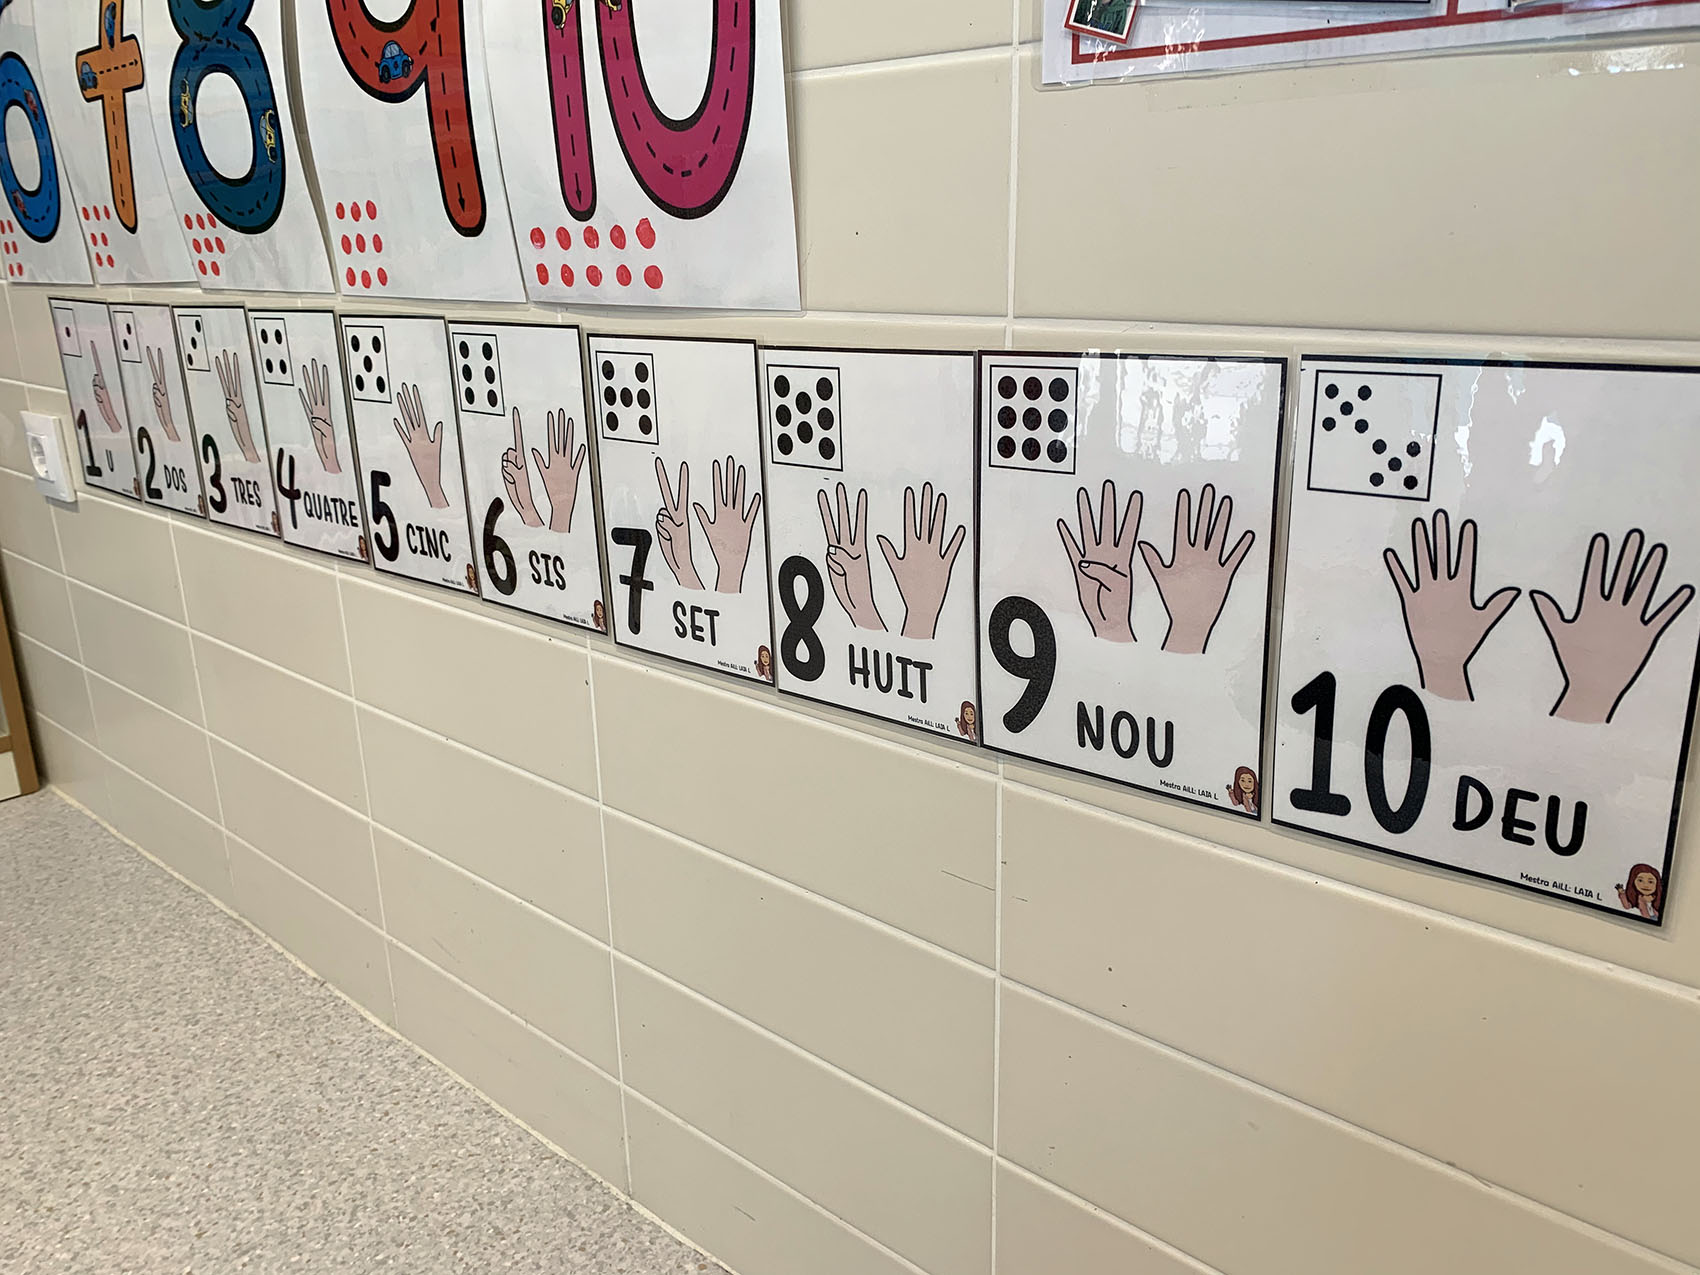 Posters with numbering from 1 to 10